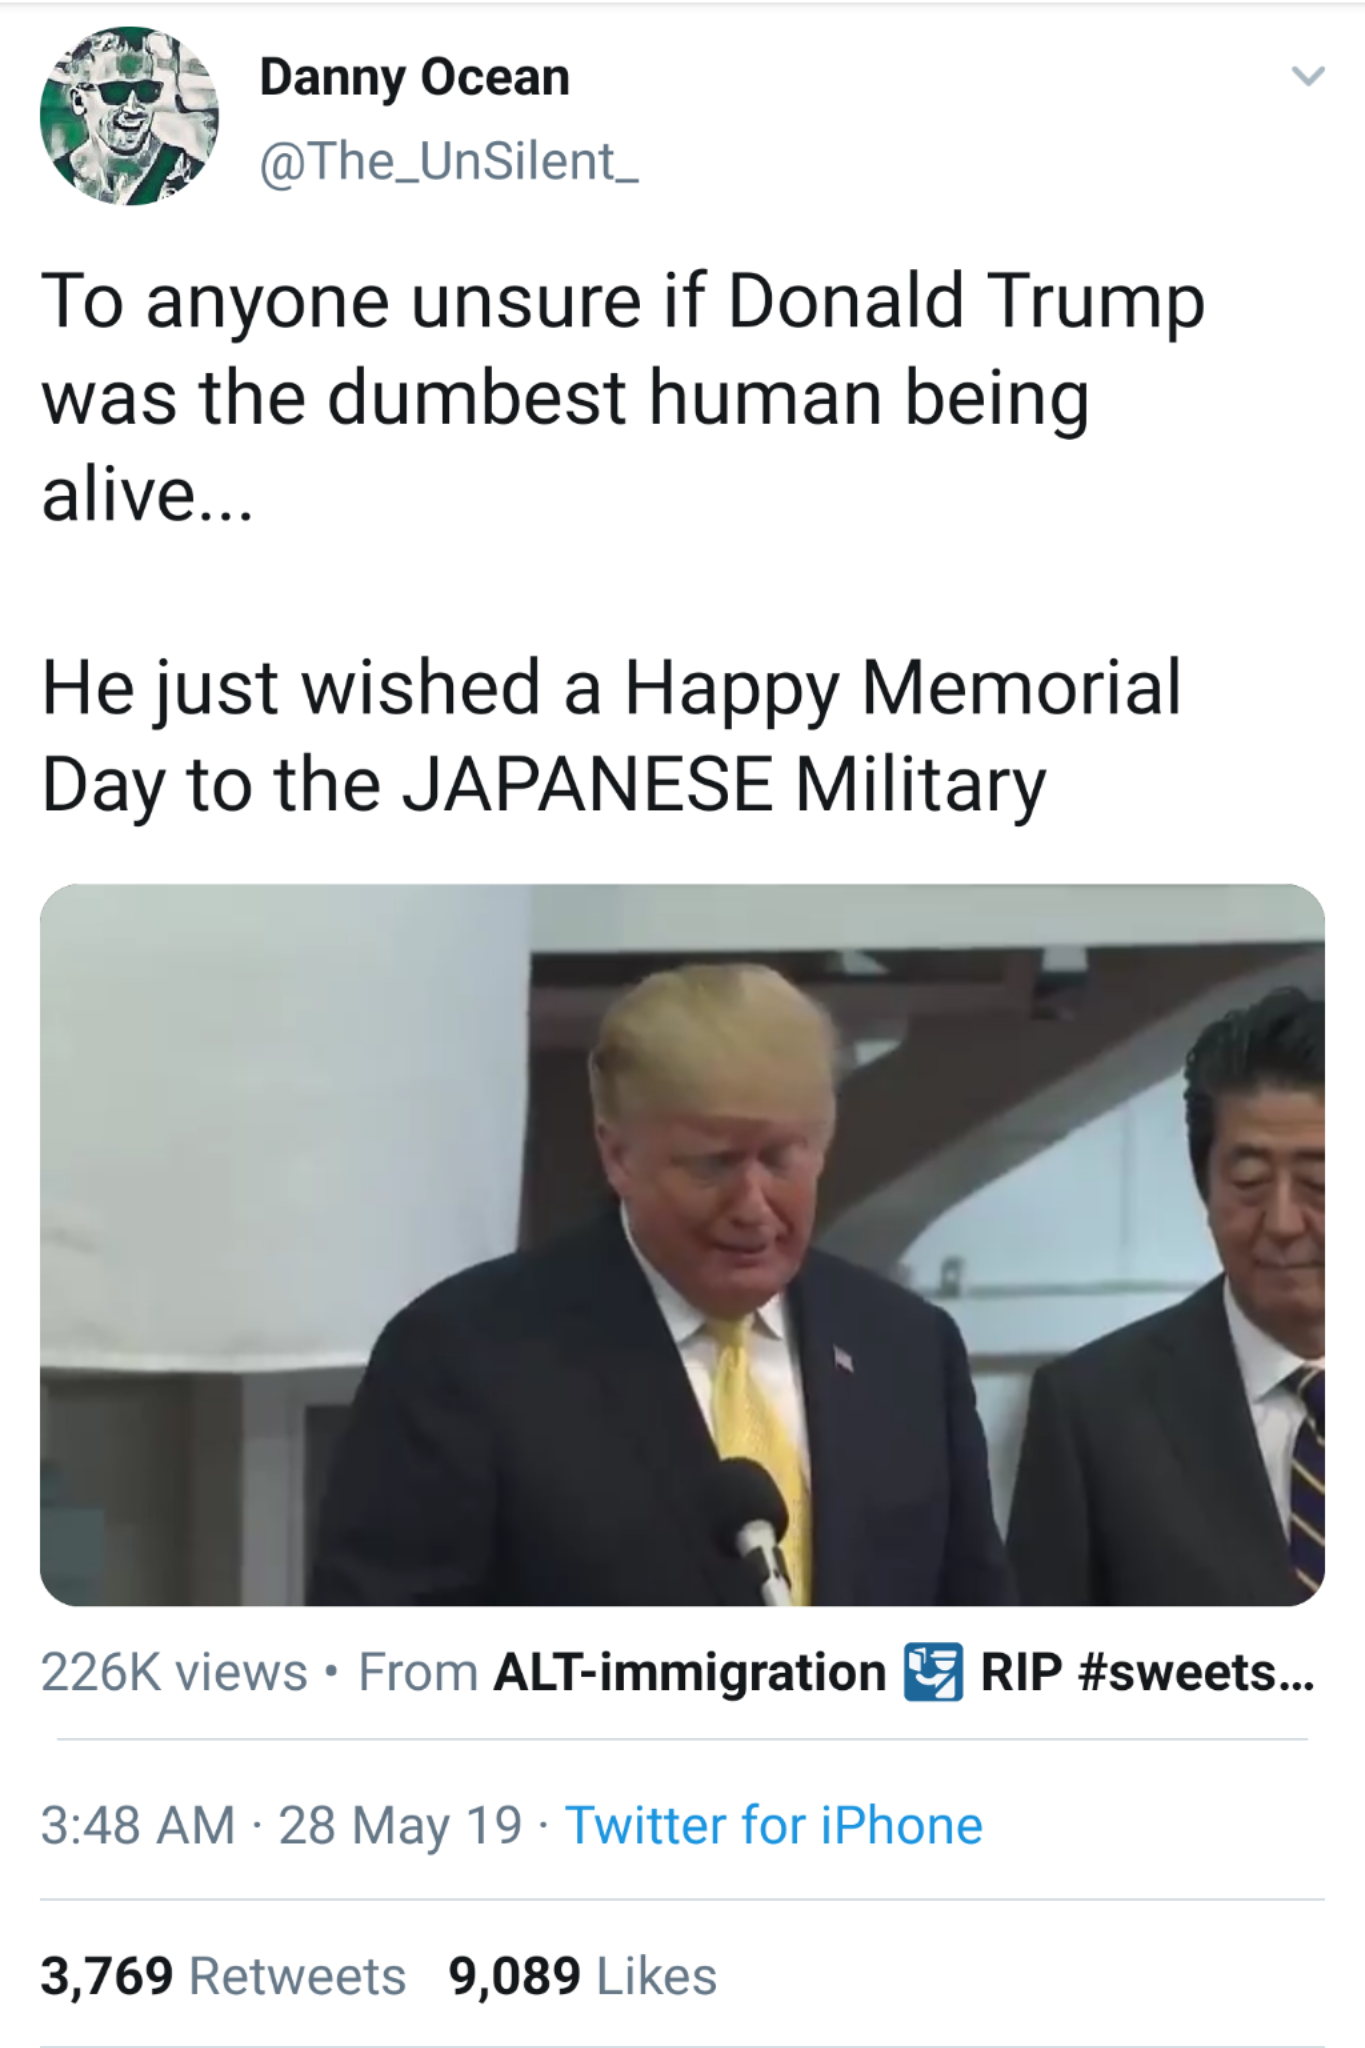 conversation - Danny Ocean To anyone unsure if Donald Trump was the dumbest human being alive... He just wished a Happy Memorial Day to the Japanese Military views. From Altimmigration Rip ... 28 May 19. Twitter for iPhone 3,769 9,089